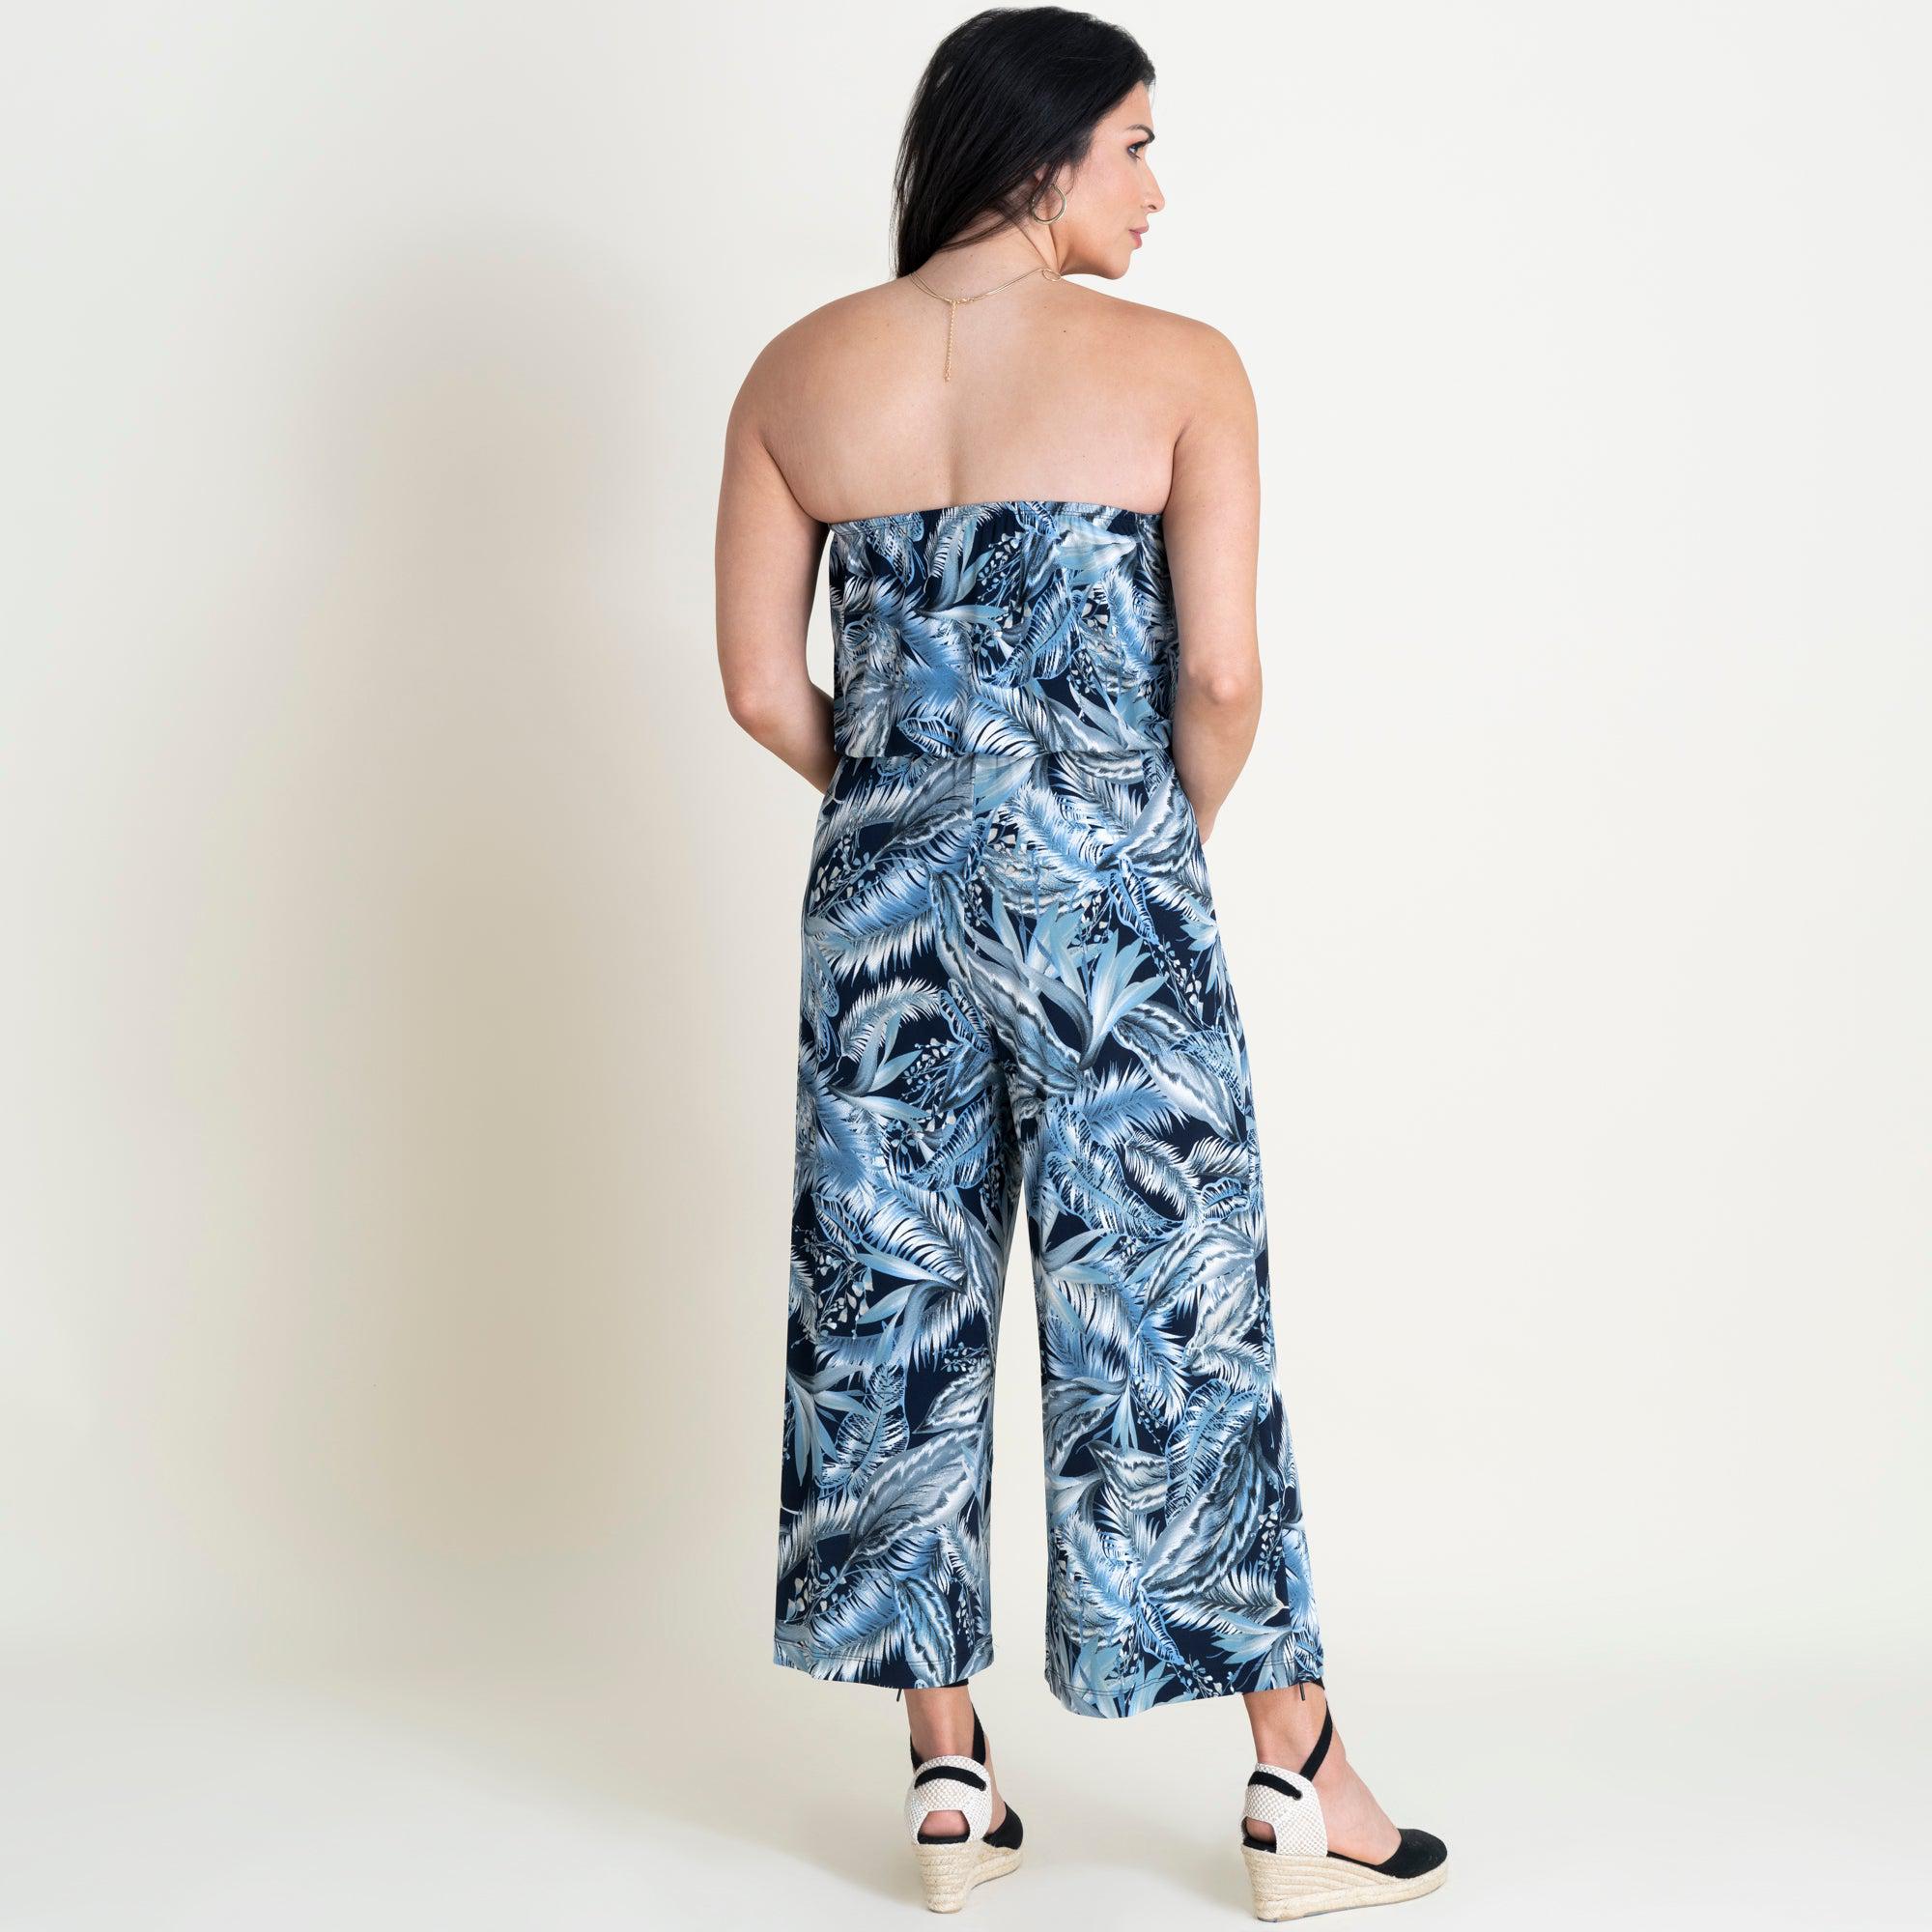 Woman posing wearing Navy Melissa Leaf Print Strapless Jumpsuit from Connected Apparel